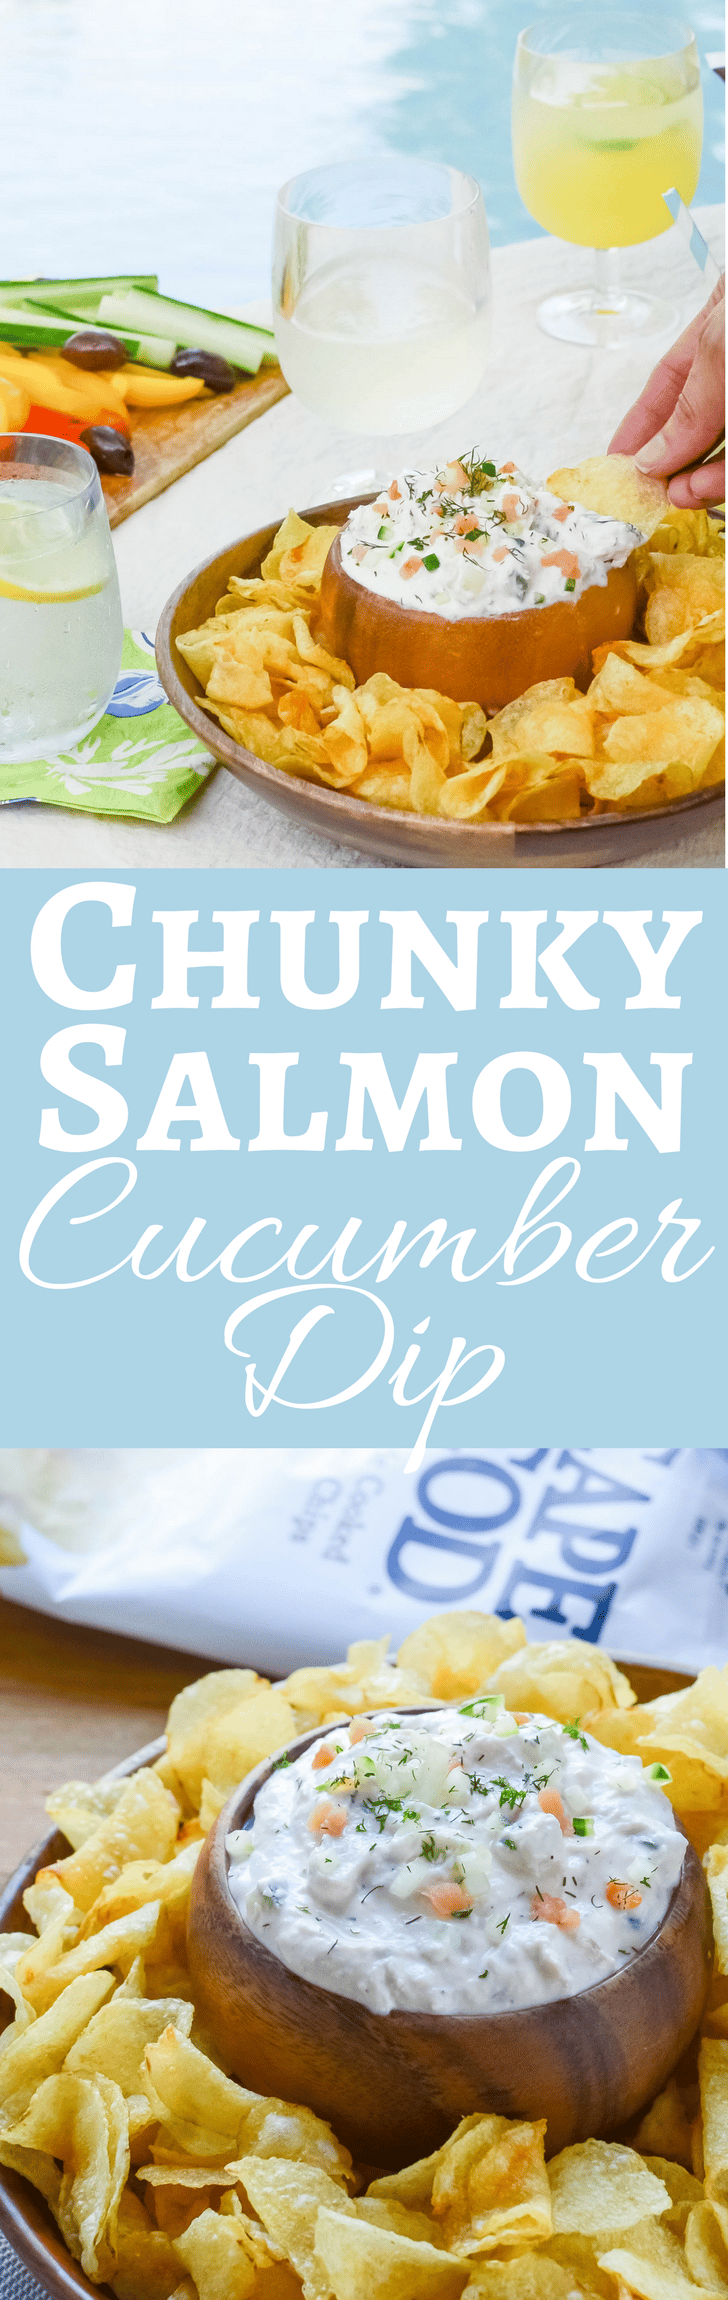 A quick and easy fish dip recipe, this Chunky Salmon Cucumber Dip, spiked with horseradish, fresh lemon, dill and smoked salmon is a crowd pleaser! #SnackSnapShare #SnackStories #AD